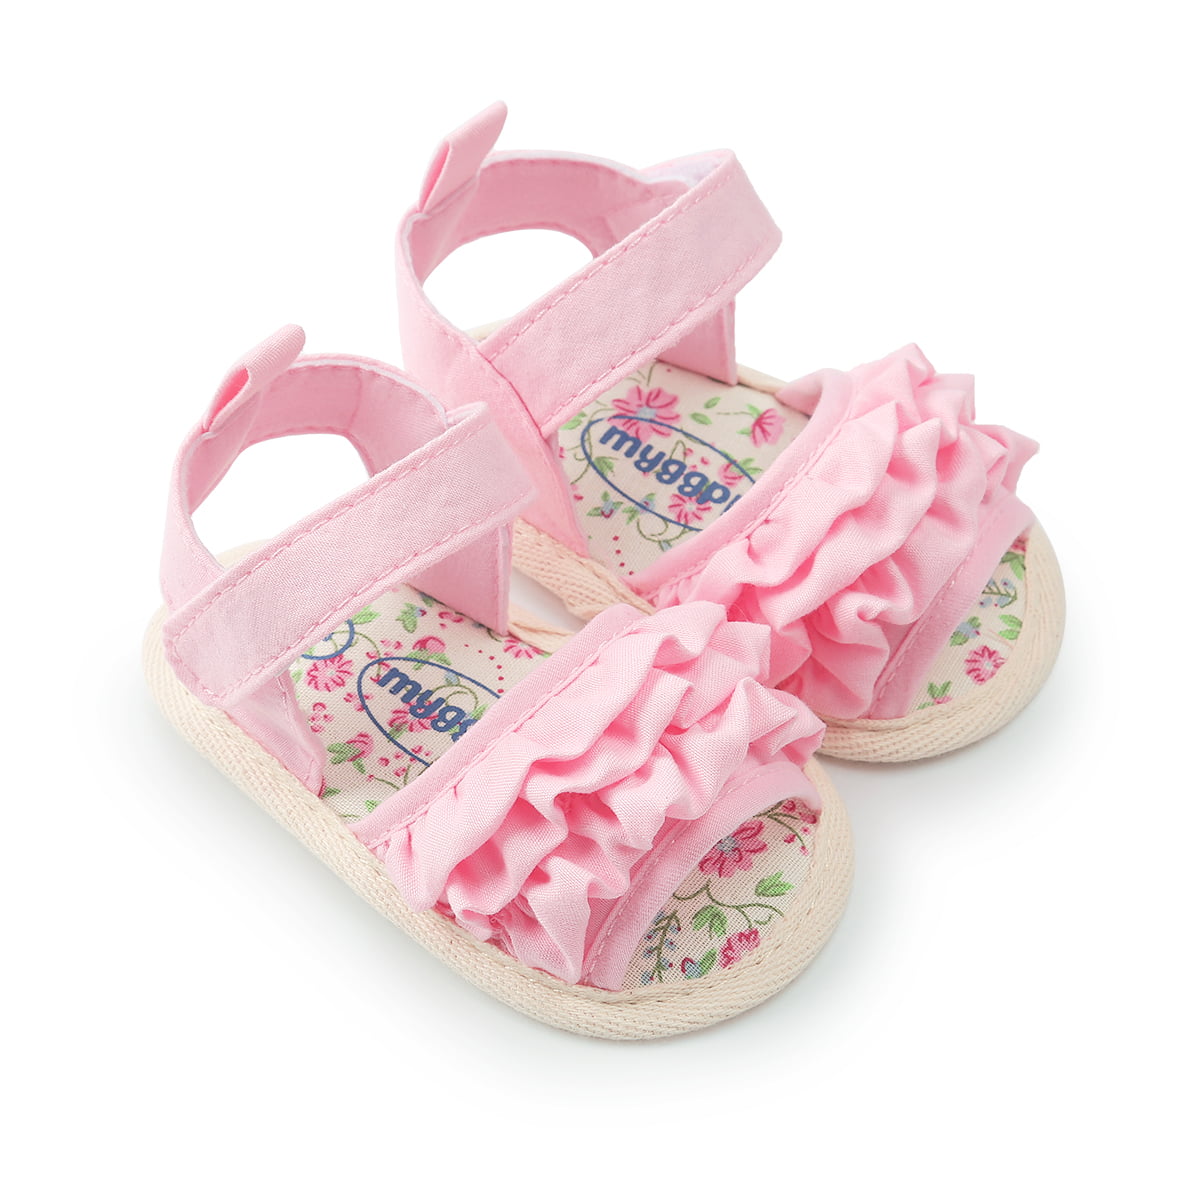 Infant Baby Flowers Girls Sandals With Sound Soft-Soled Girls Shoes Sandals CA 